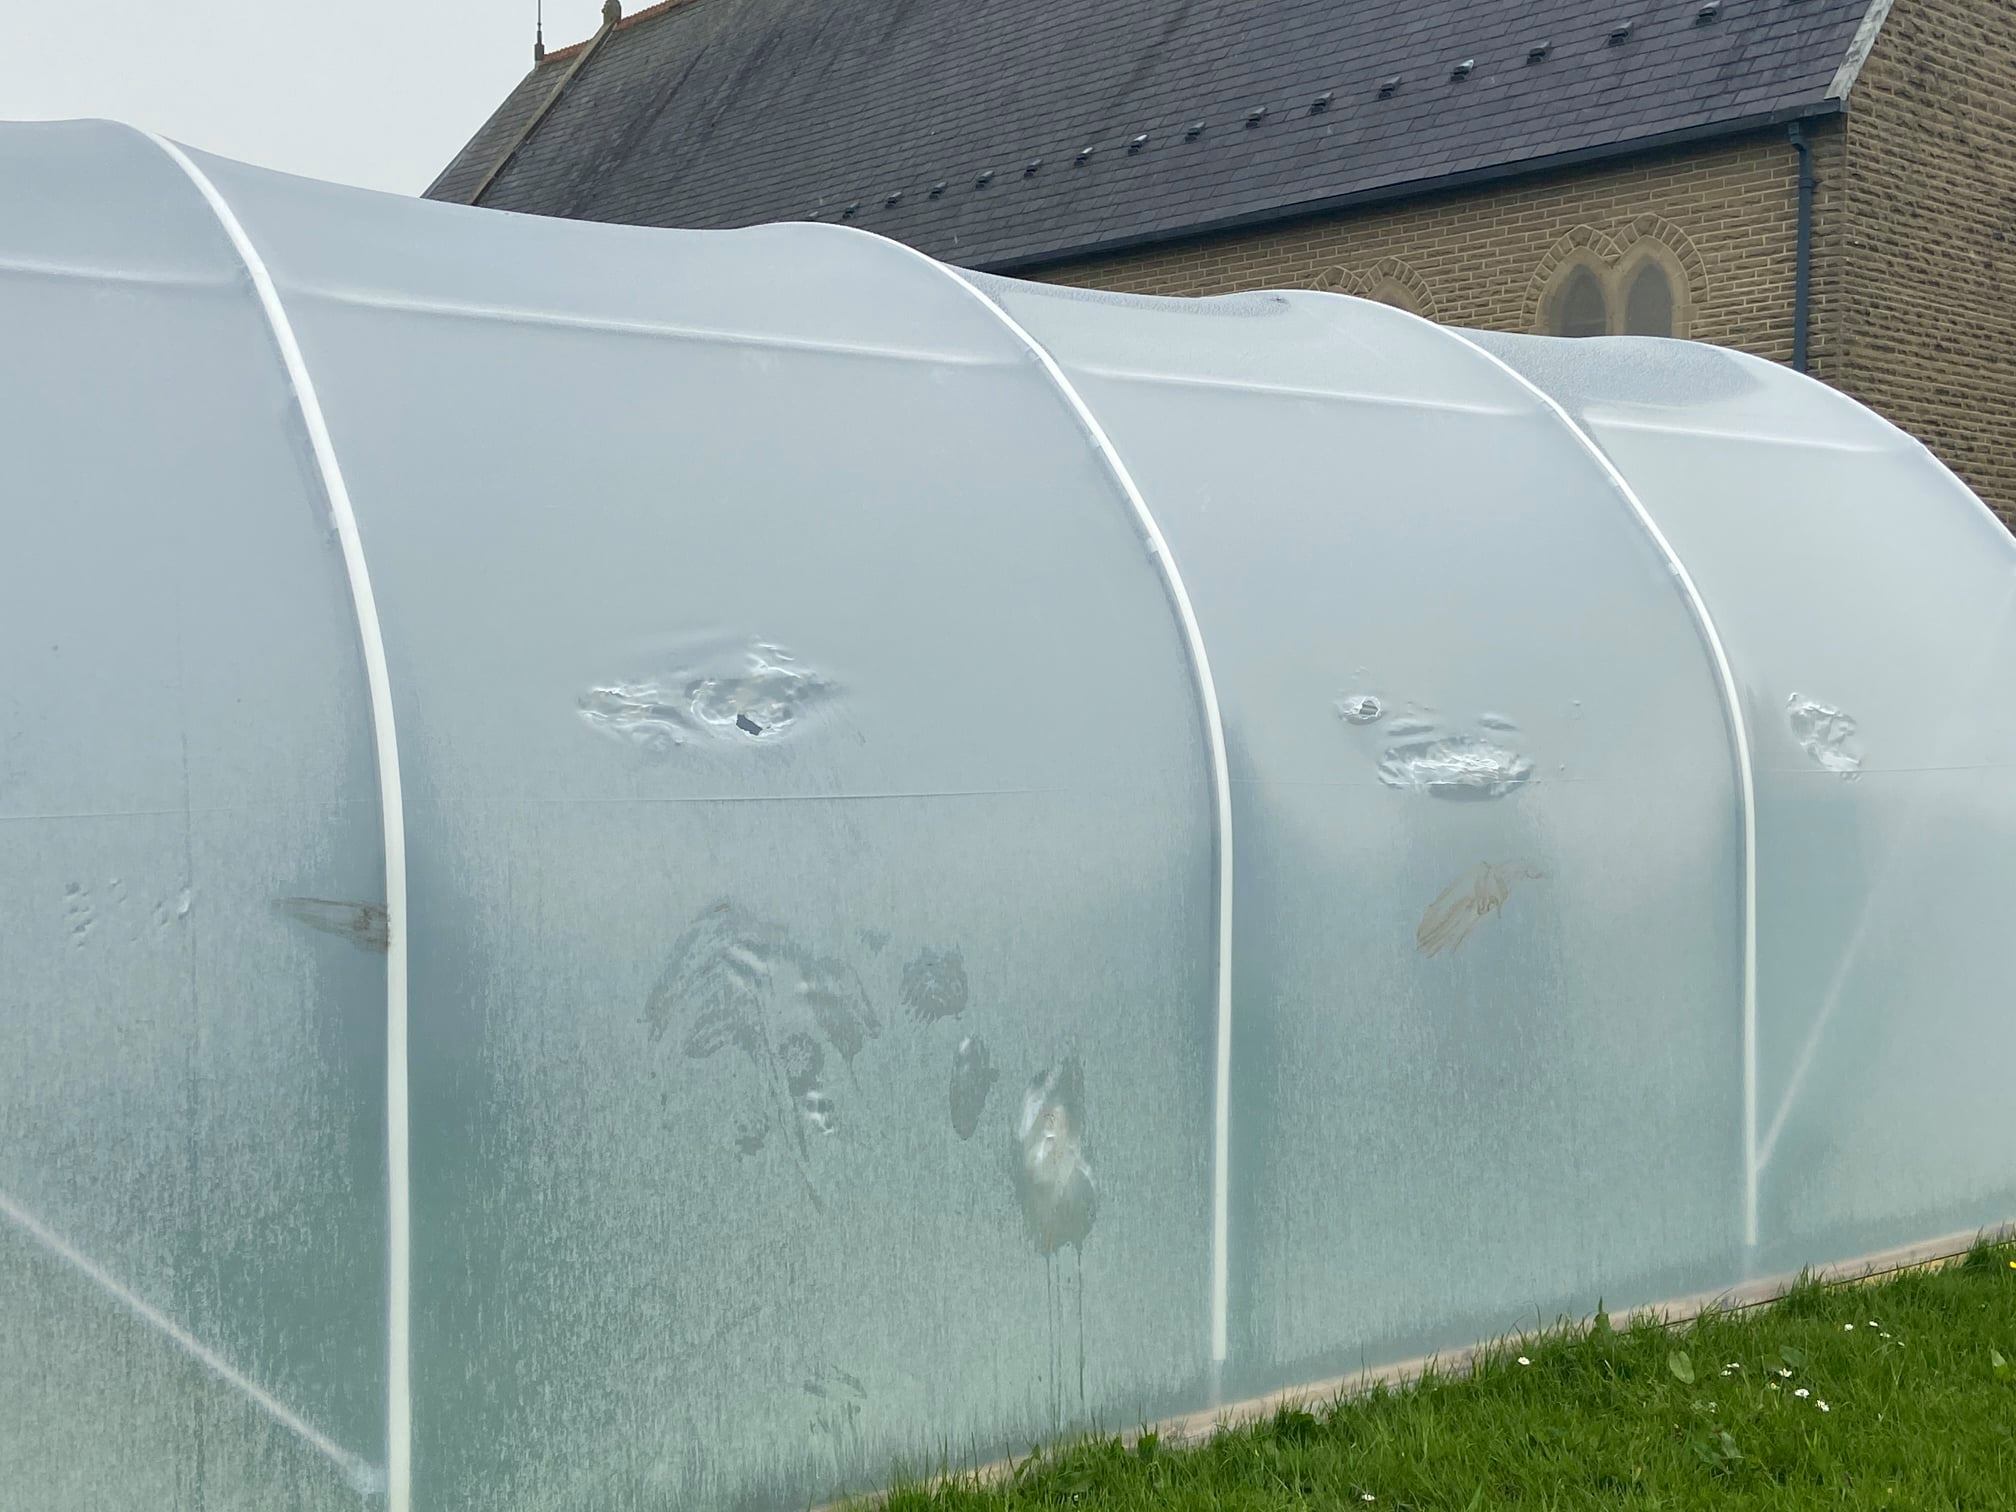 Mindless vandals have wrecked the childrens polytunnel 